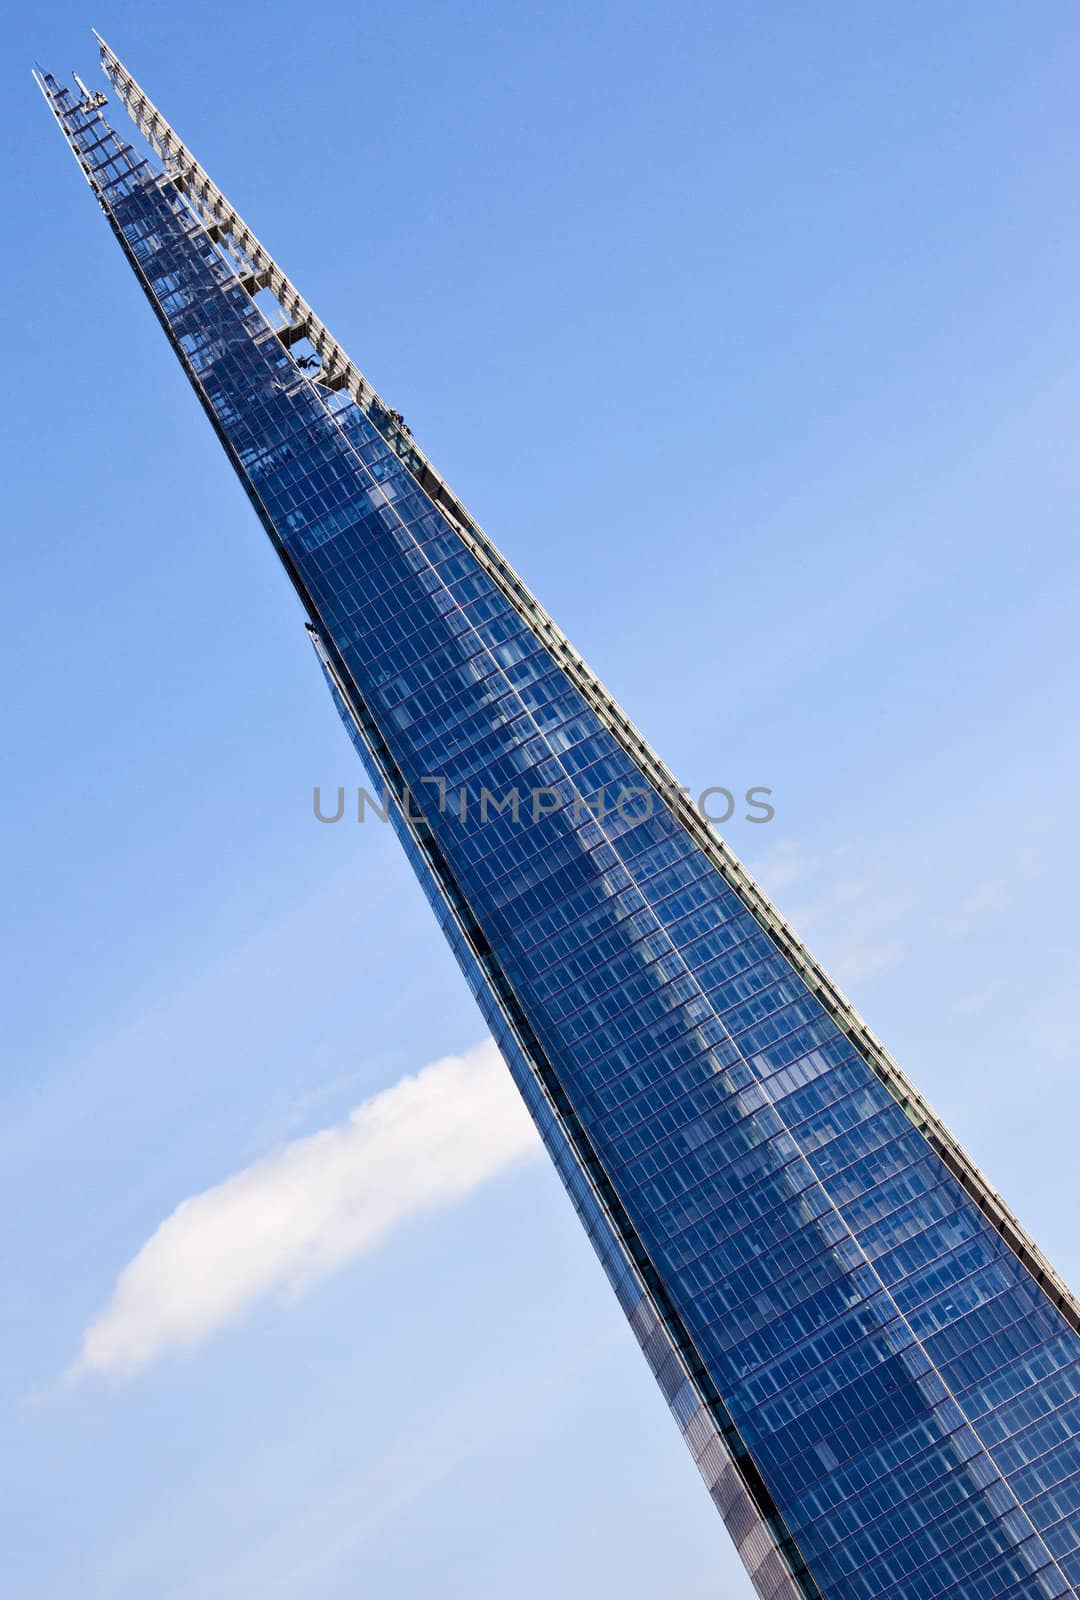 The Shard in London.  Currently the tallest building in Western Europe.